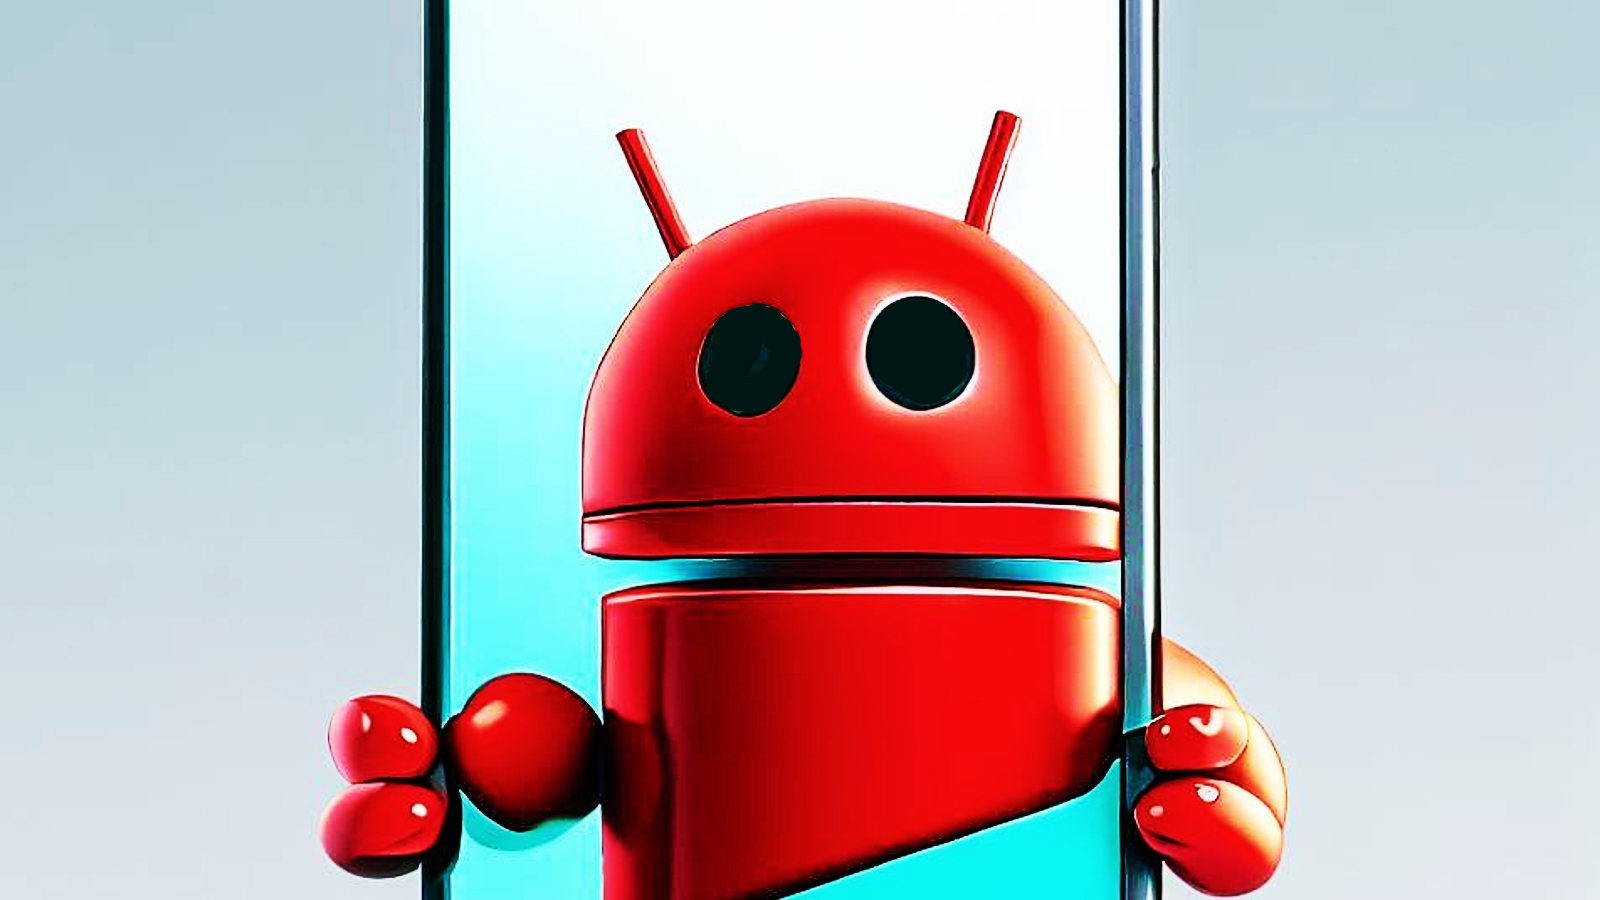 SpinOk Android malware found in more apps with 30 million installs